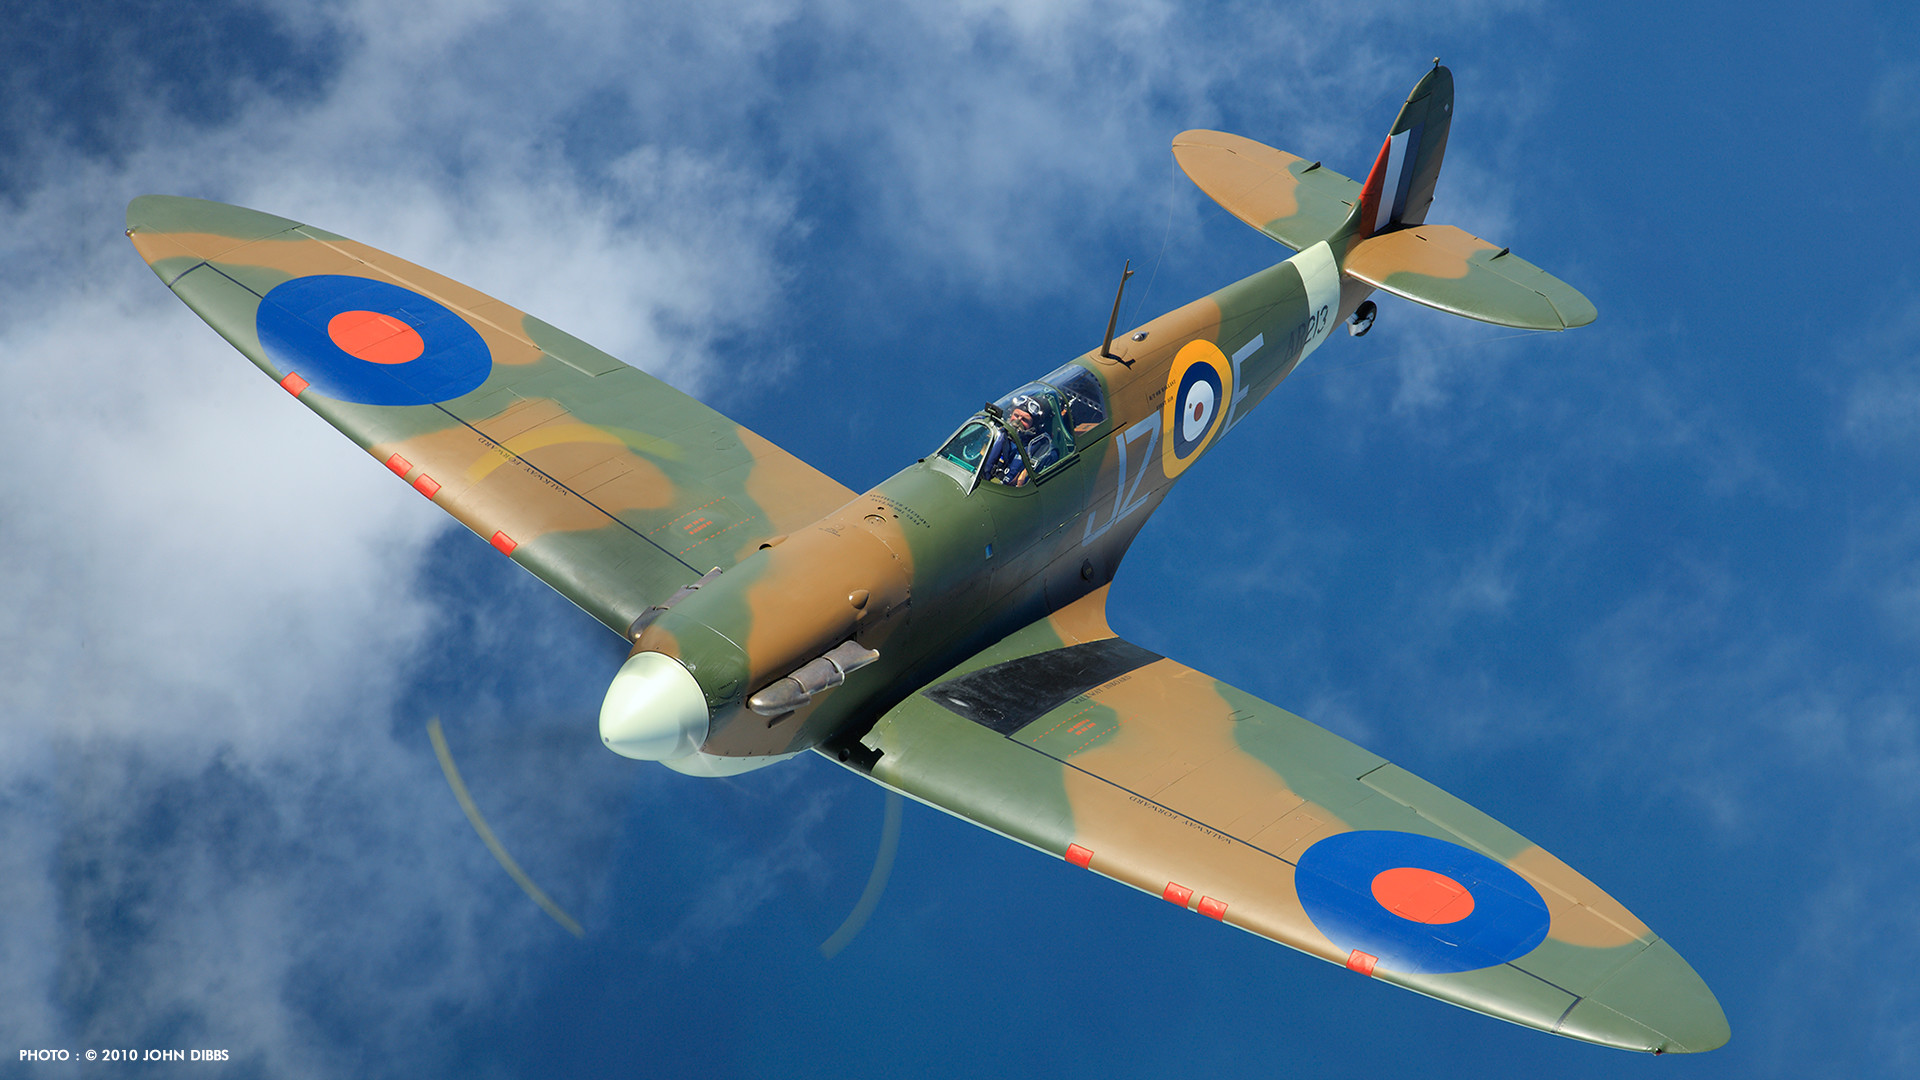 These Images Of A Supermarine Spitfire Mark Ia High - Supermarine Spitfire In Flight - HD Wallpaper 